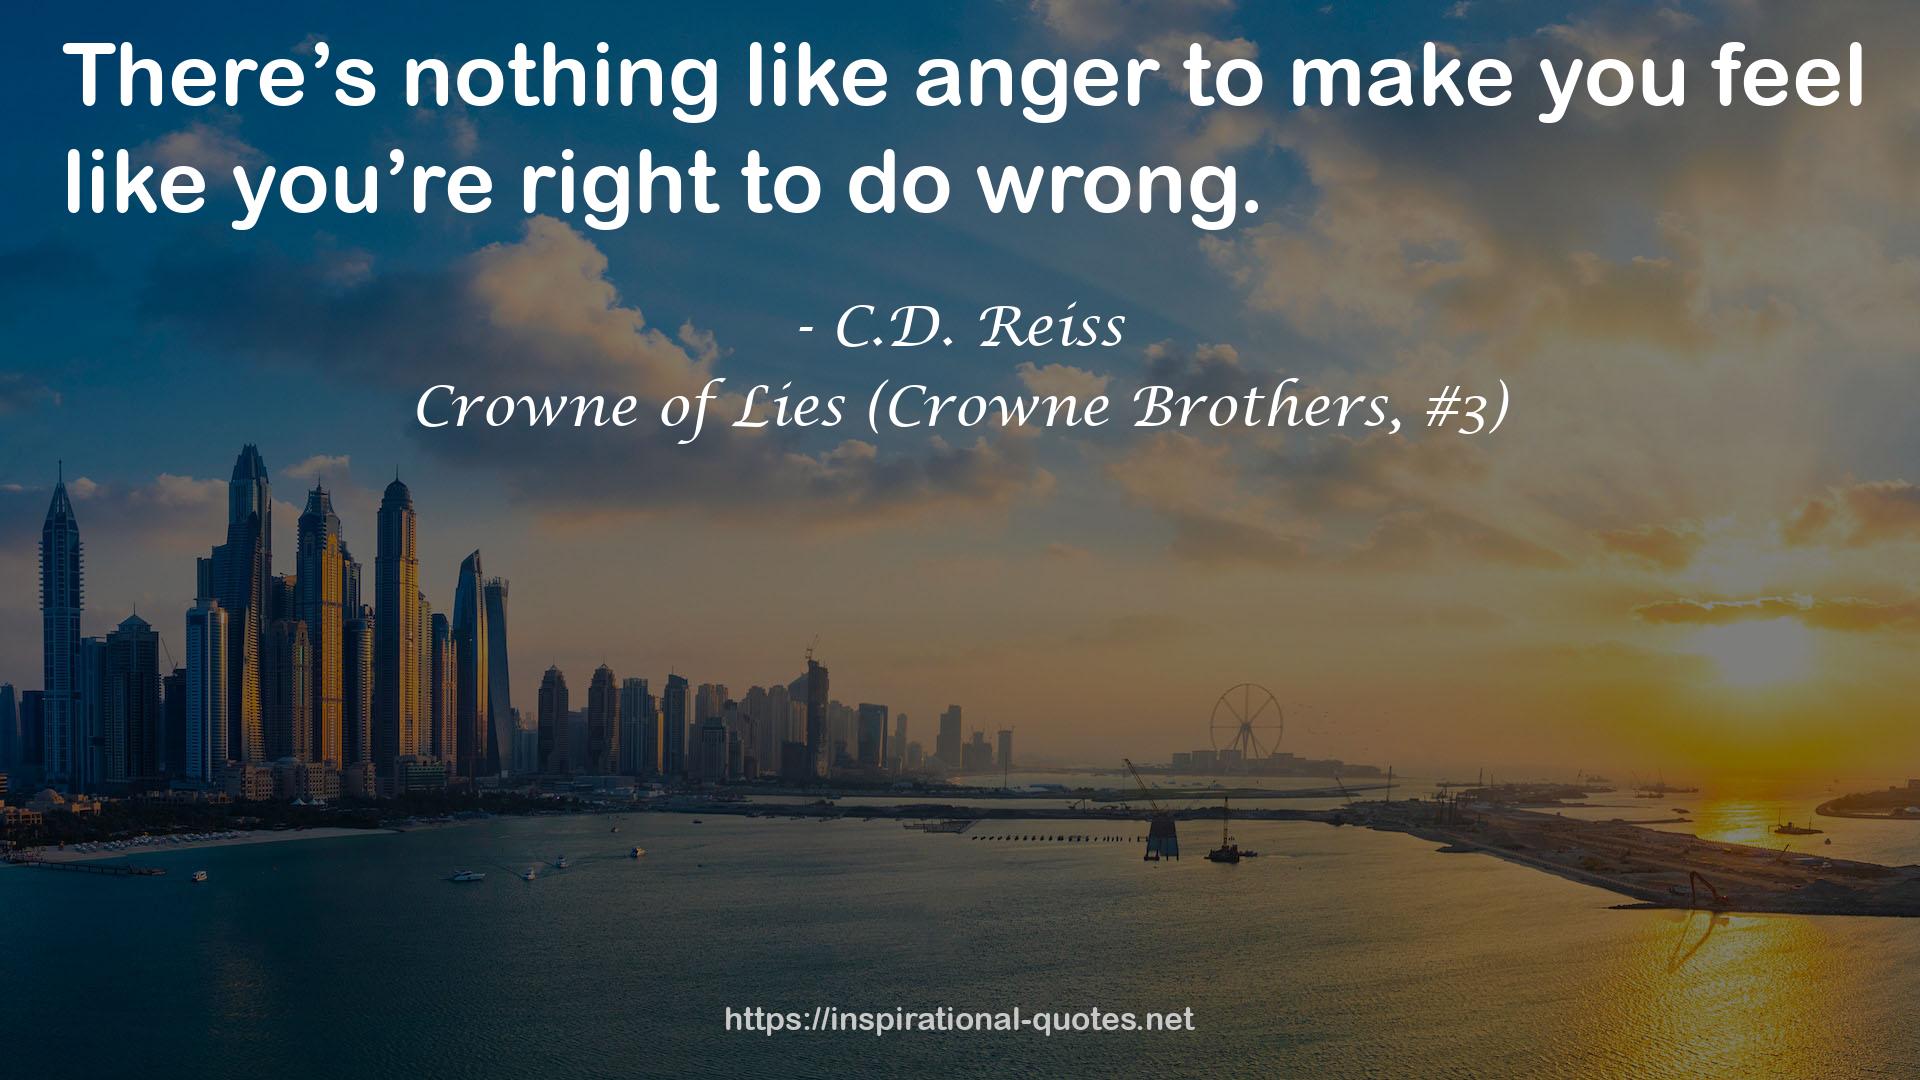 Crowne of Lies (Crowne Brothers, #3) QUOTES